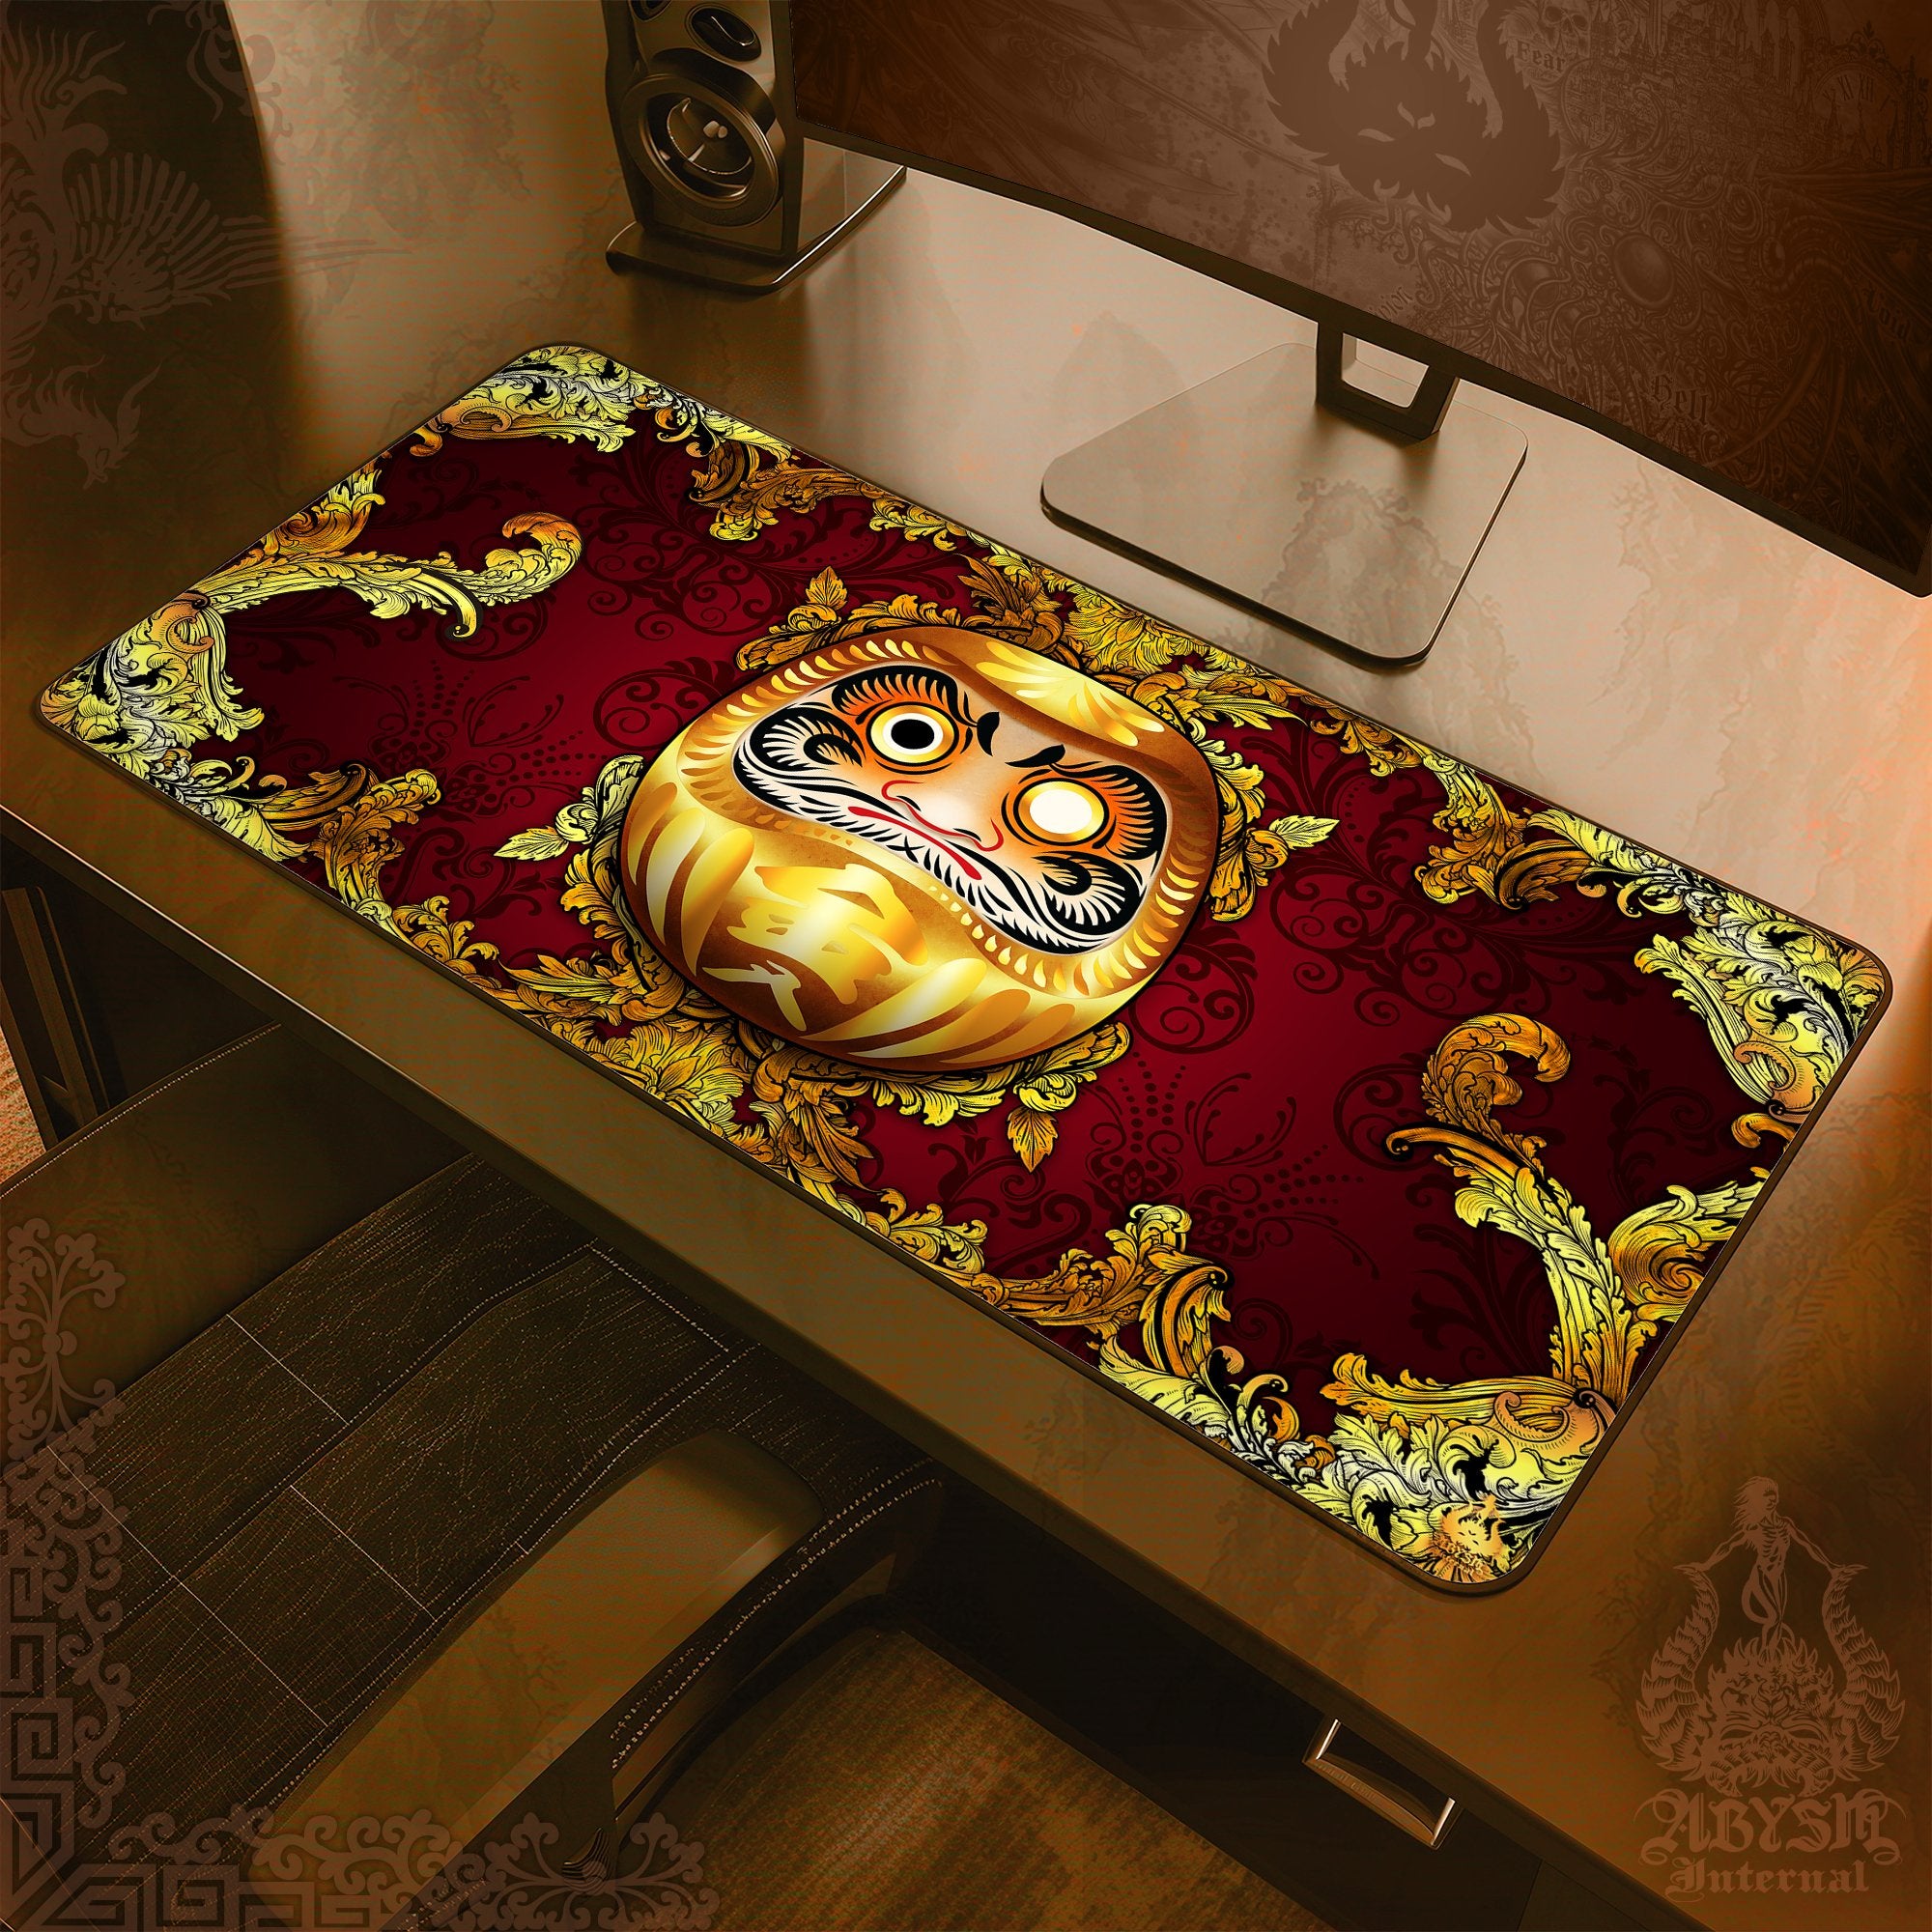 Mouse Pad, Daruma Gaming Desk Mat, Japanese Workpad, Red and Gold Table Protector Cover, Art Print - 3 Colors - Abysm Internal